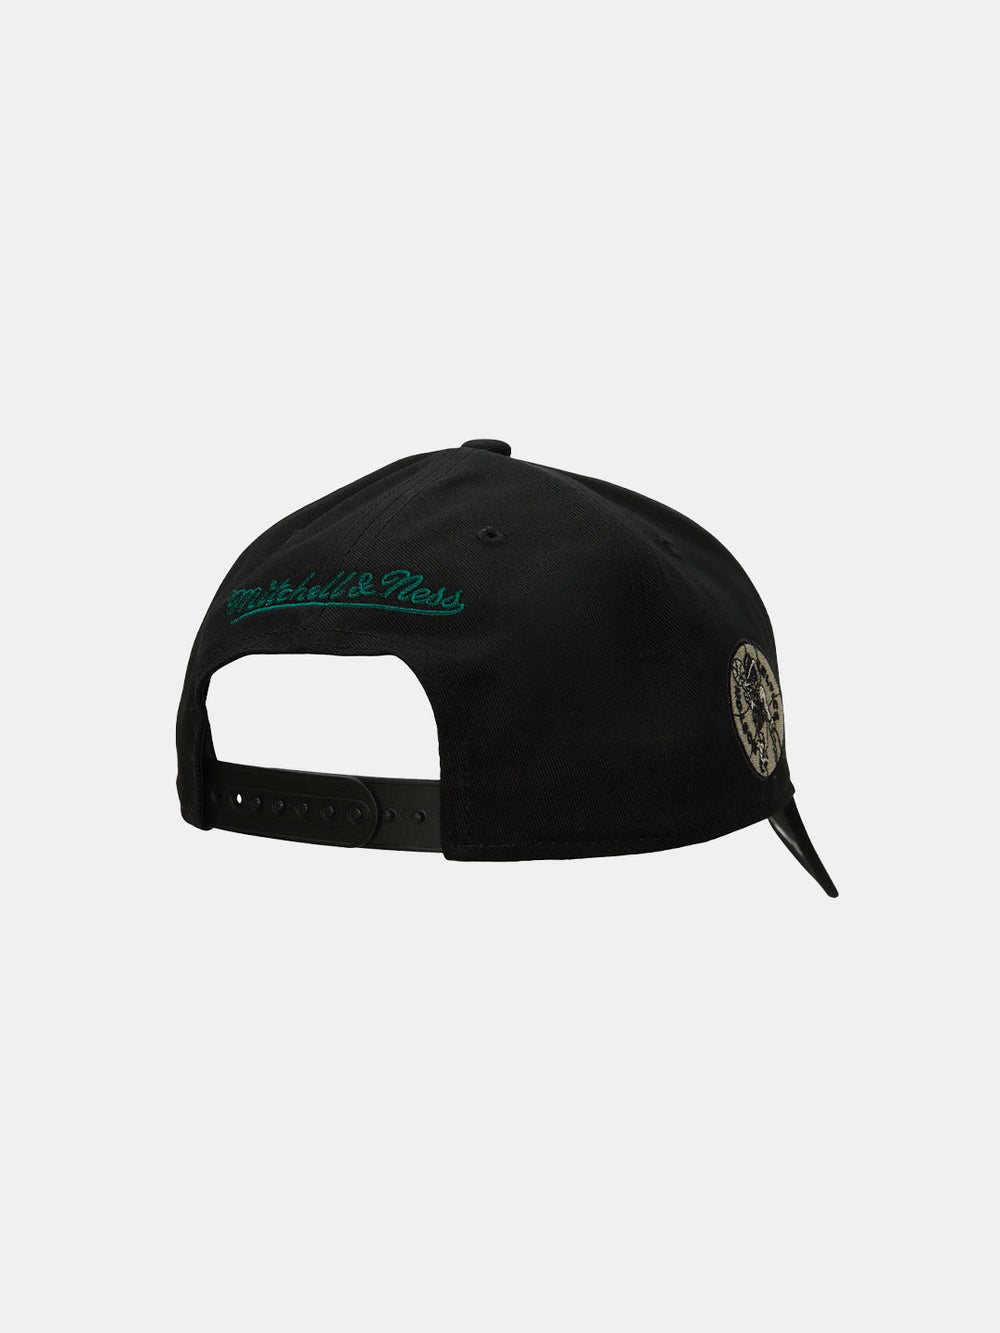 back view of the snapback hat